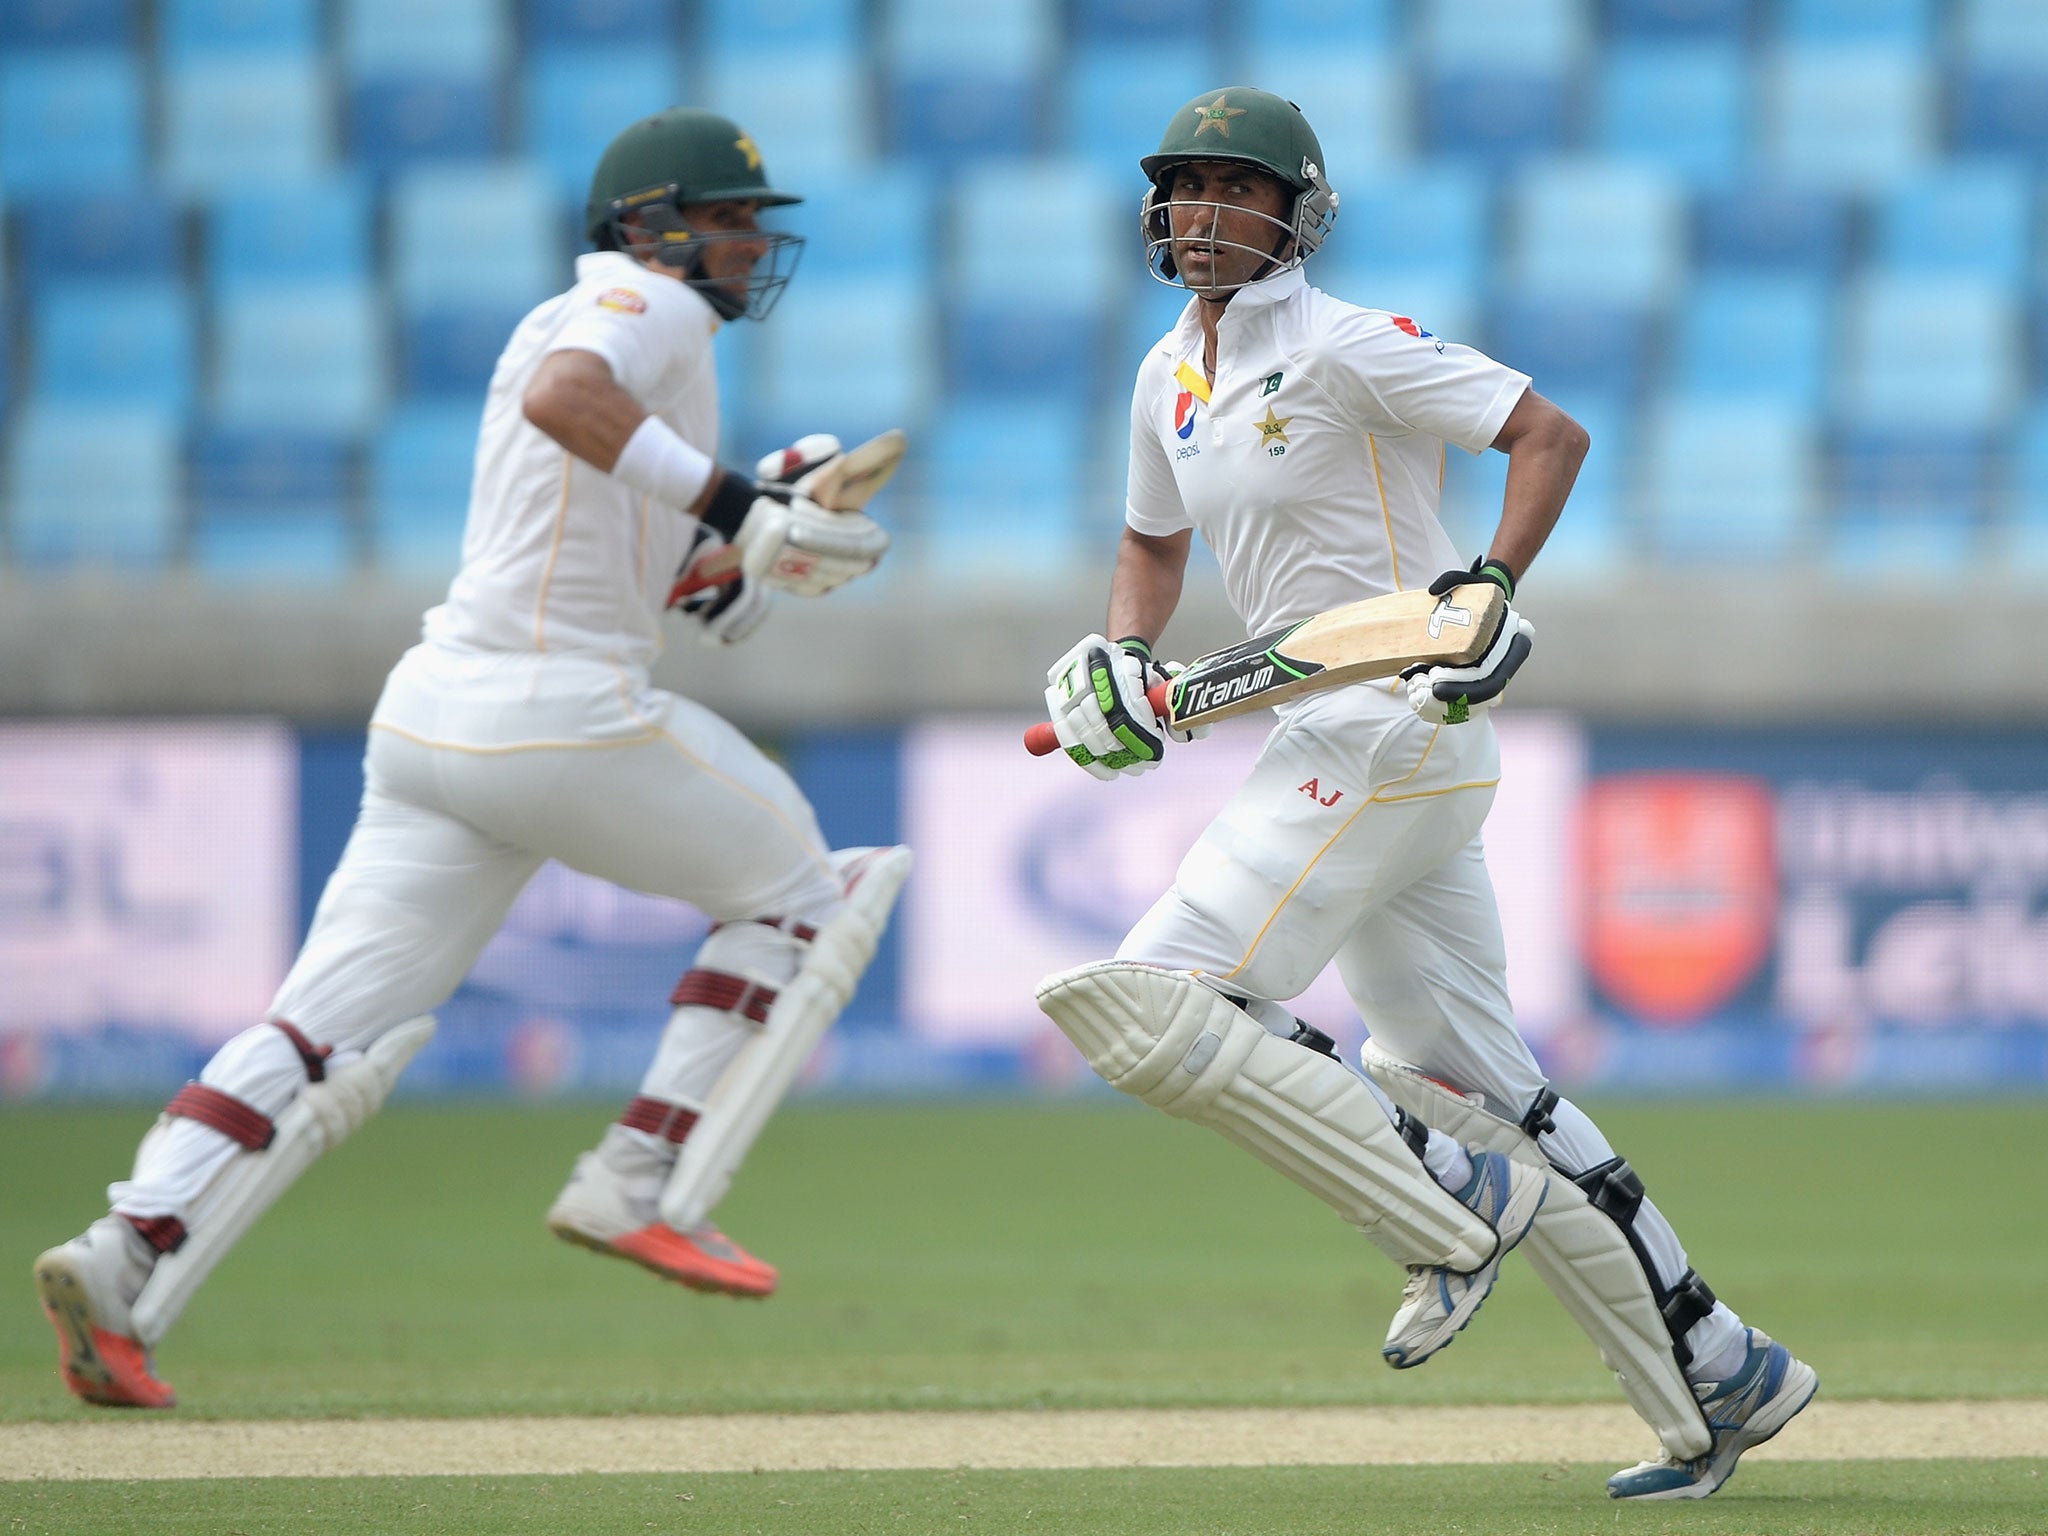 Pakistan captain Misbah-ul-Haq and Younis Khan run between the wickets on day one of the Second Test with England